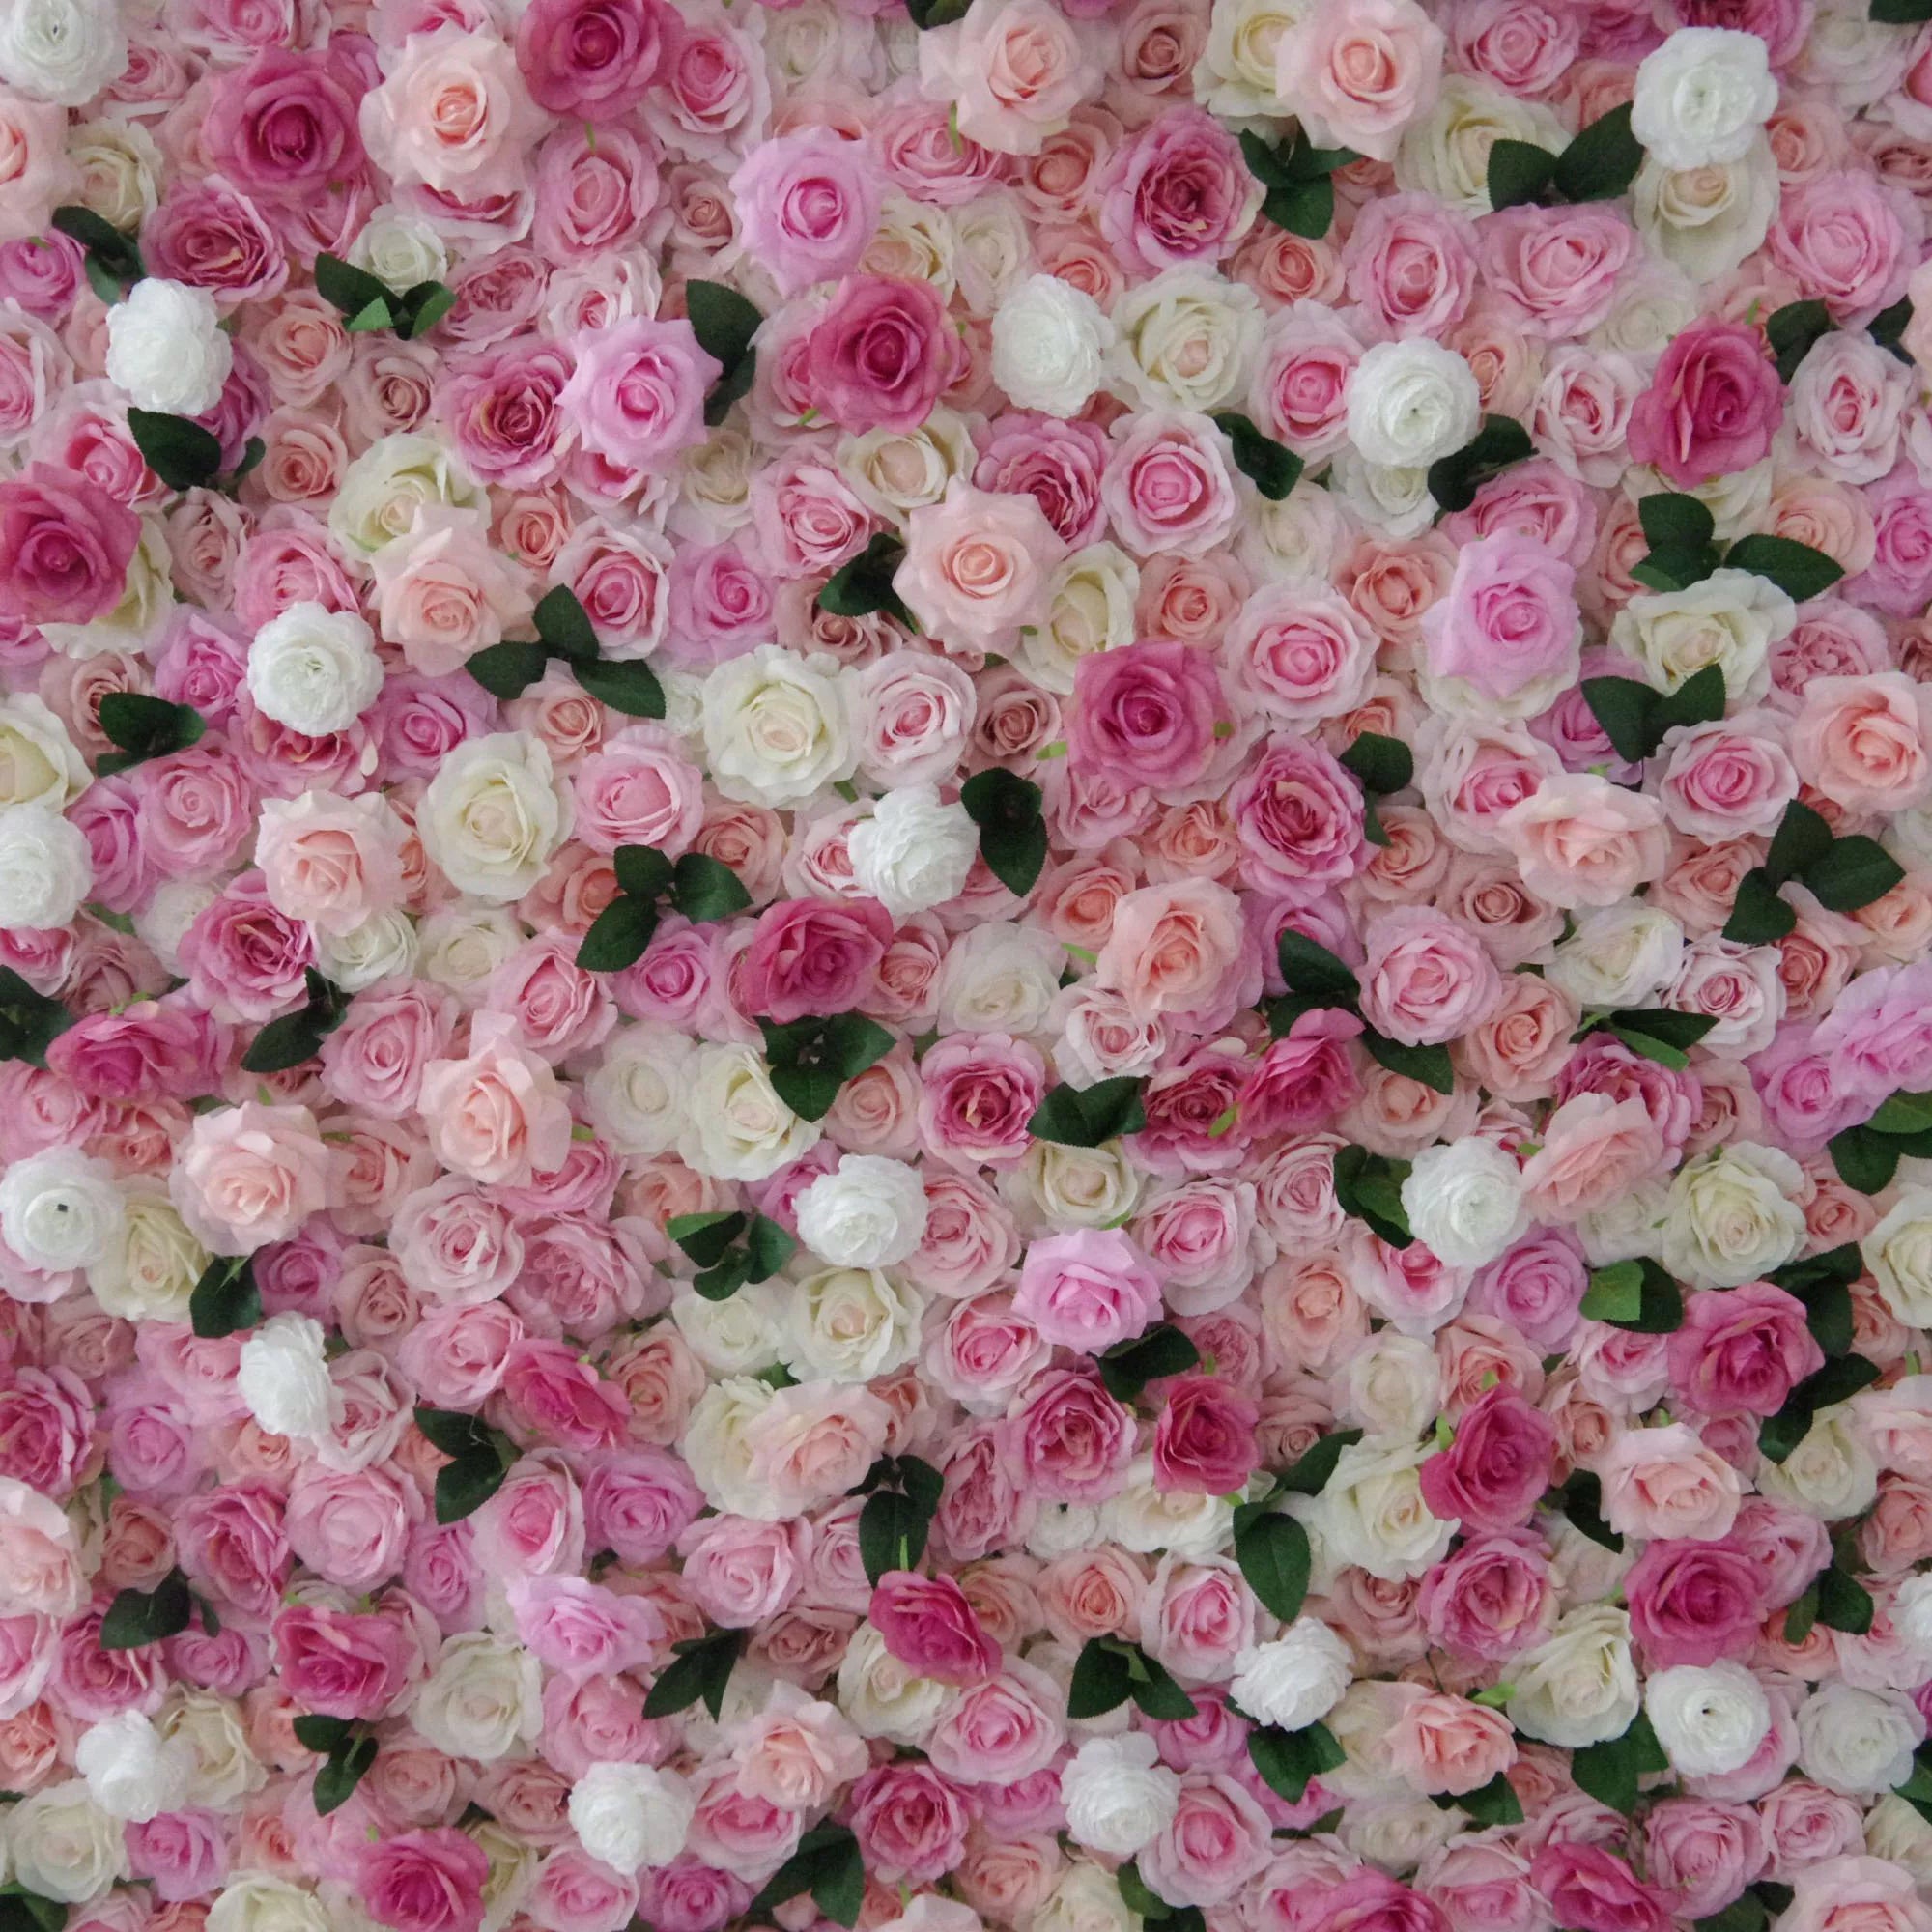 Valar Flowers artificial mixed pink and white floral wall roll up fabric for wedding backdrop, floral party decor, and event photography, model VF-0842